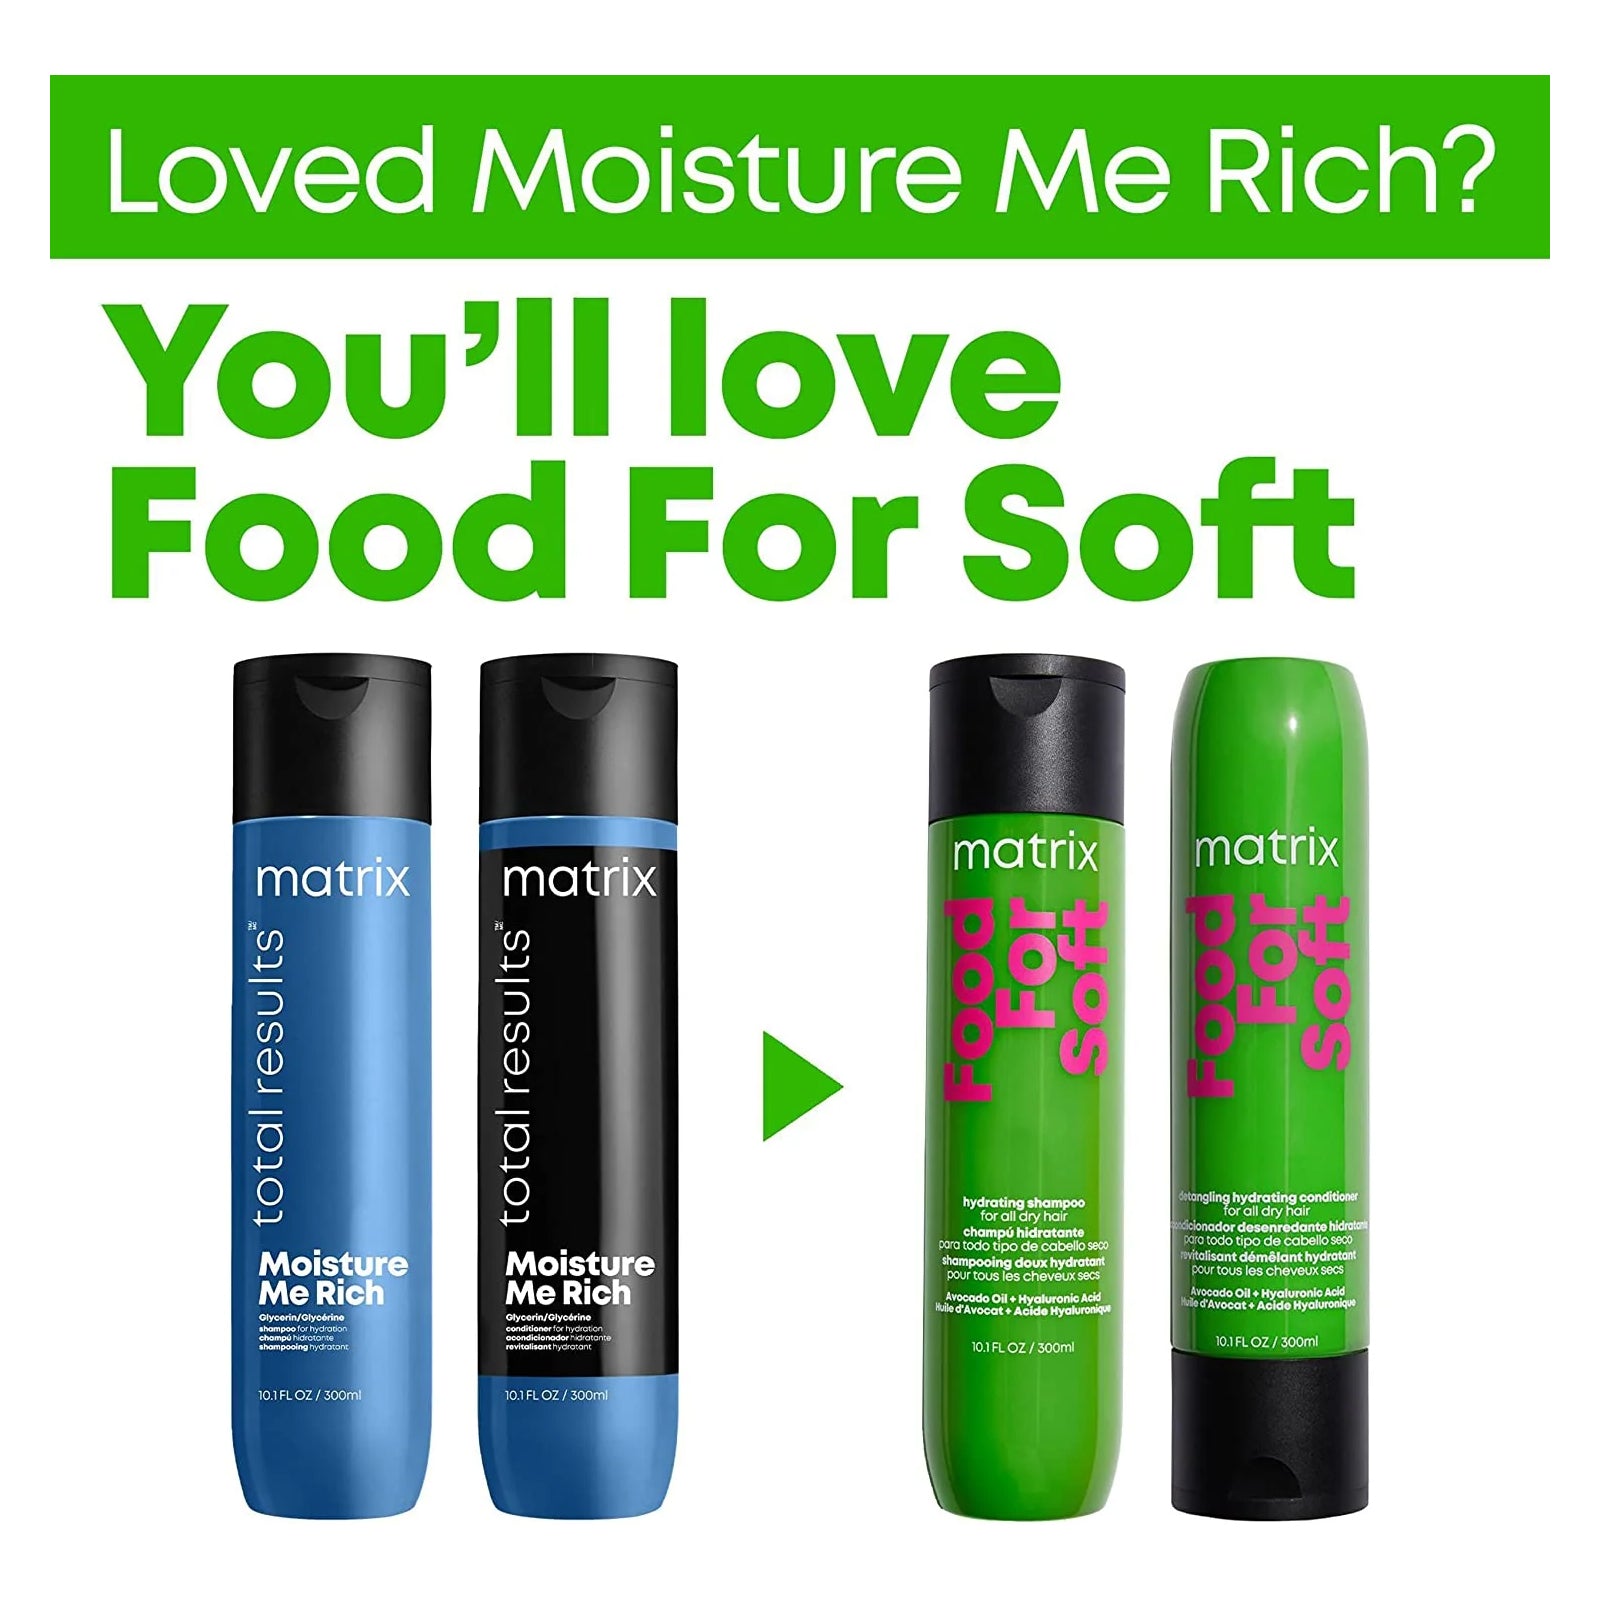 Matrix Moisture Me Rich is now Food For Soft Hydrating 